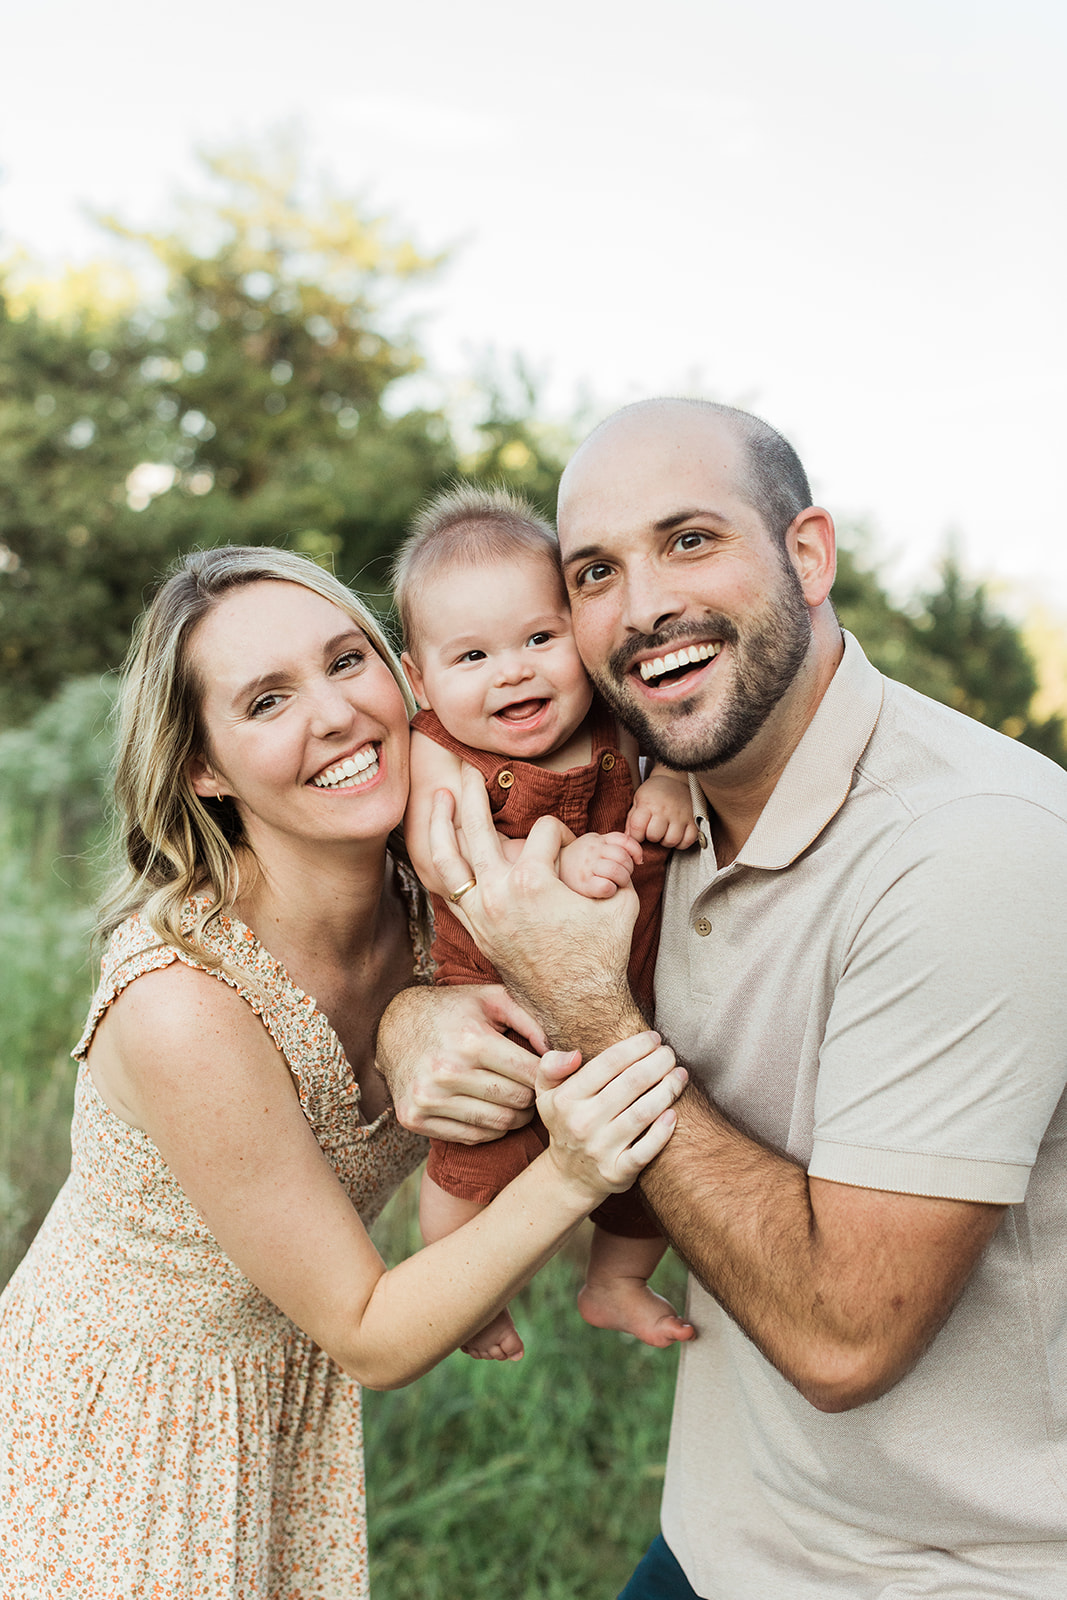 6 month milestone session in nashville studio. parents with son